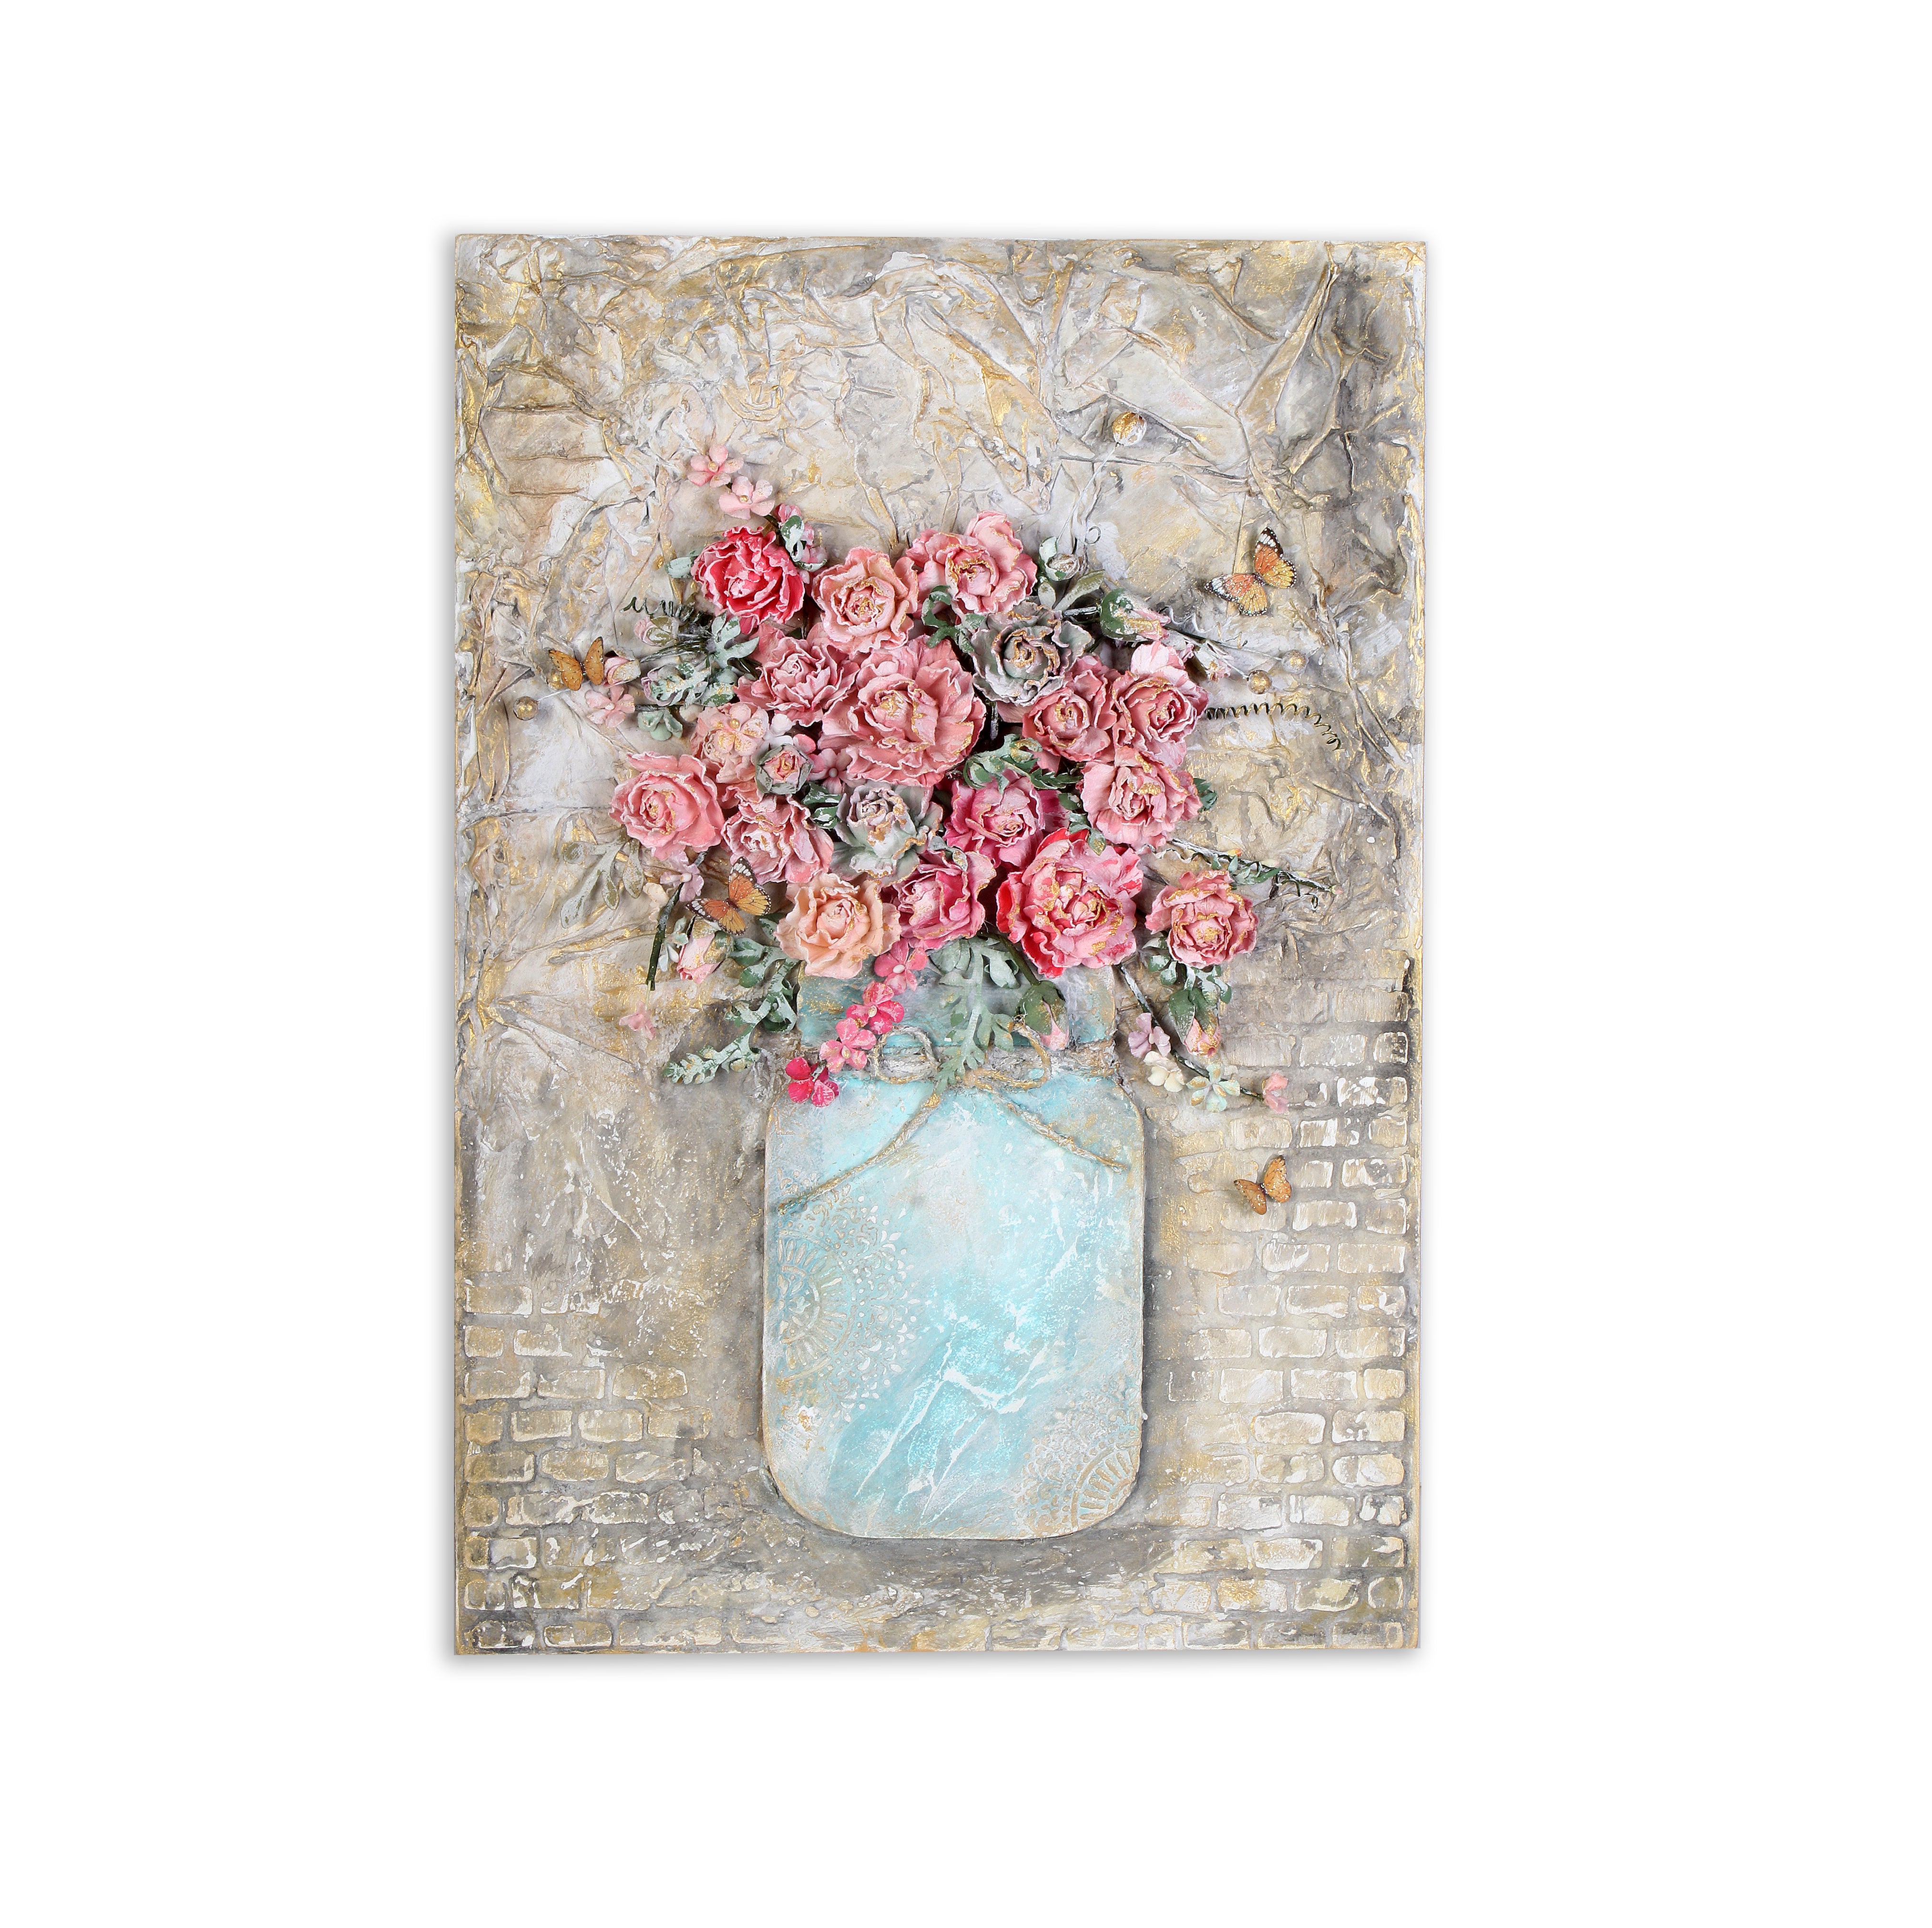 Wall Decor Mixed Media Flower Vase Approx H18 X L12 X D0.98inch 1pc